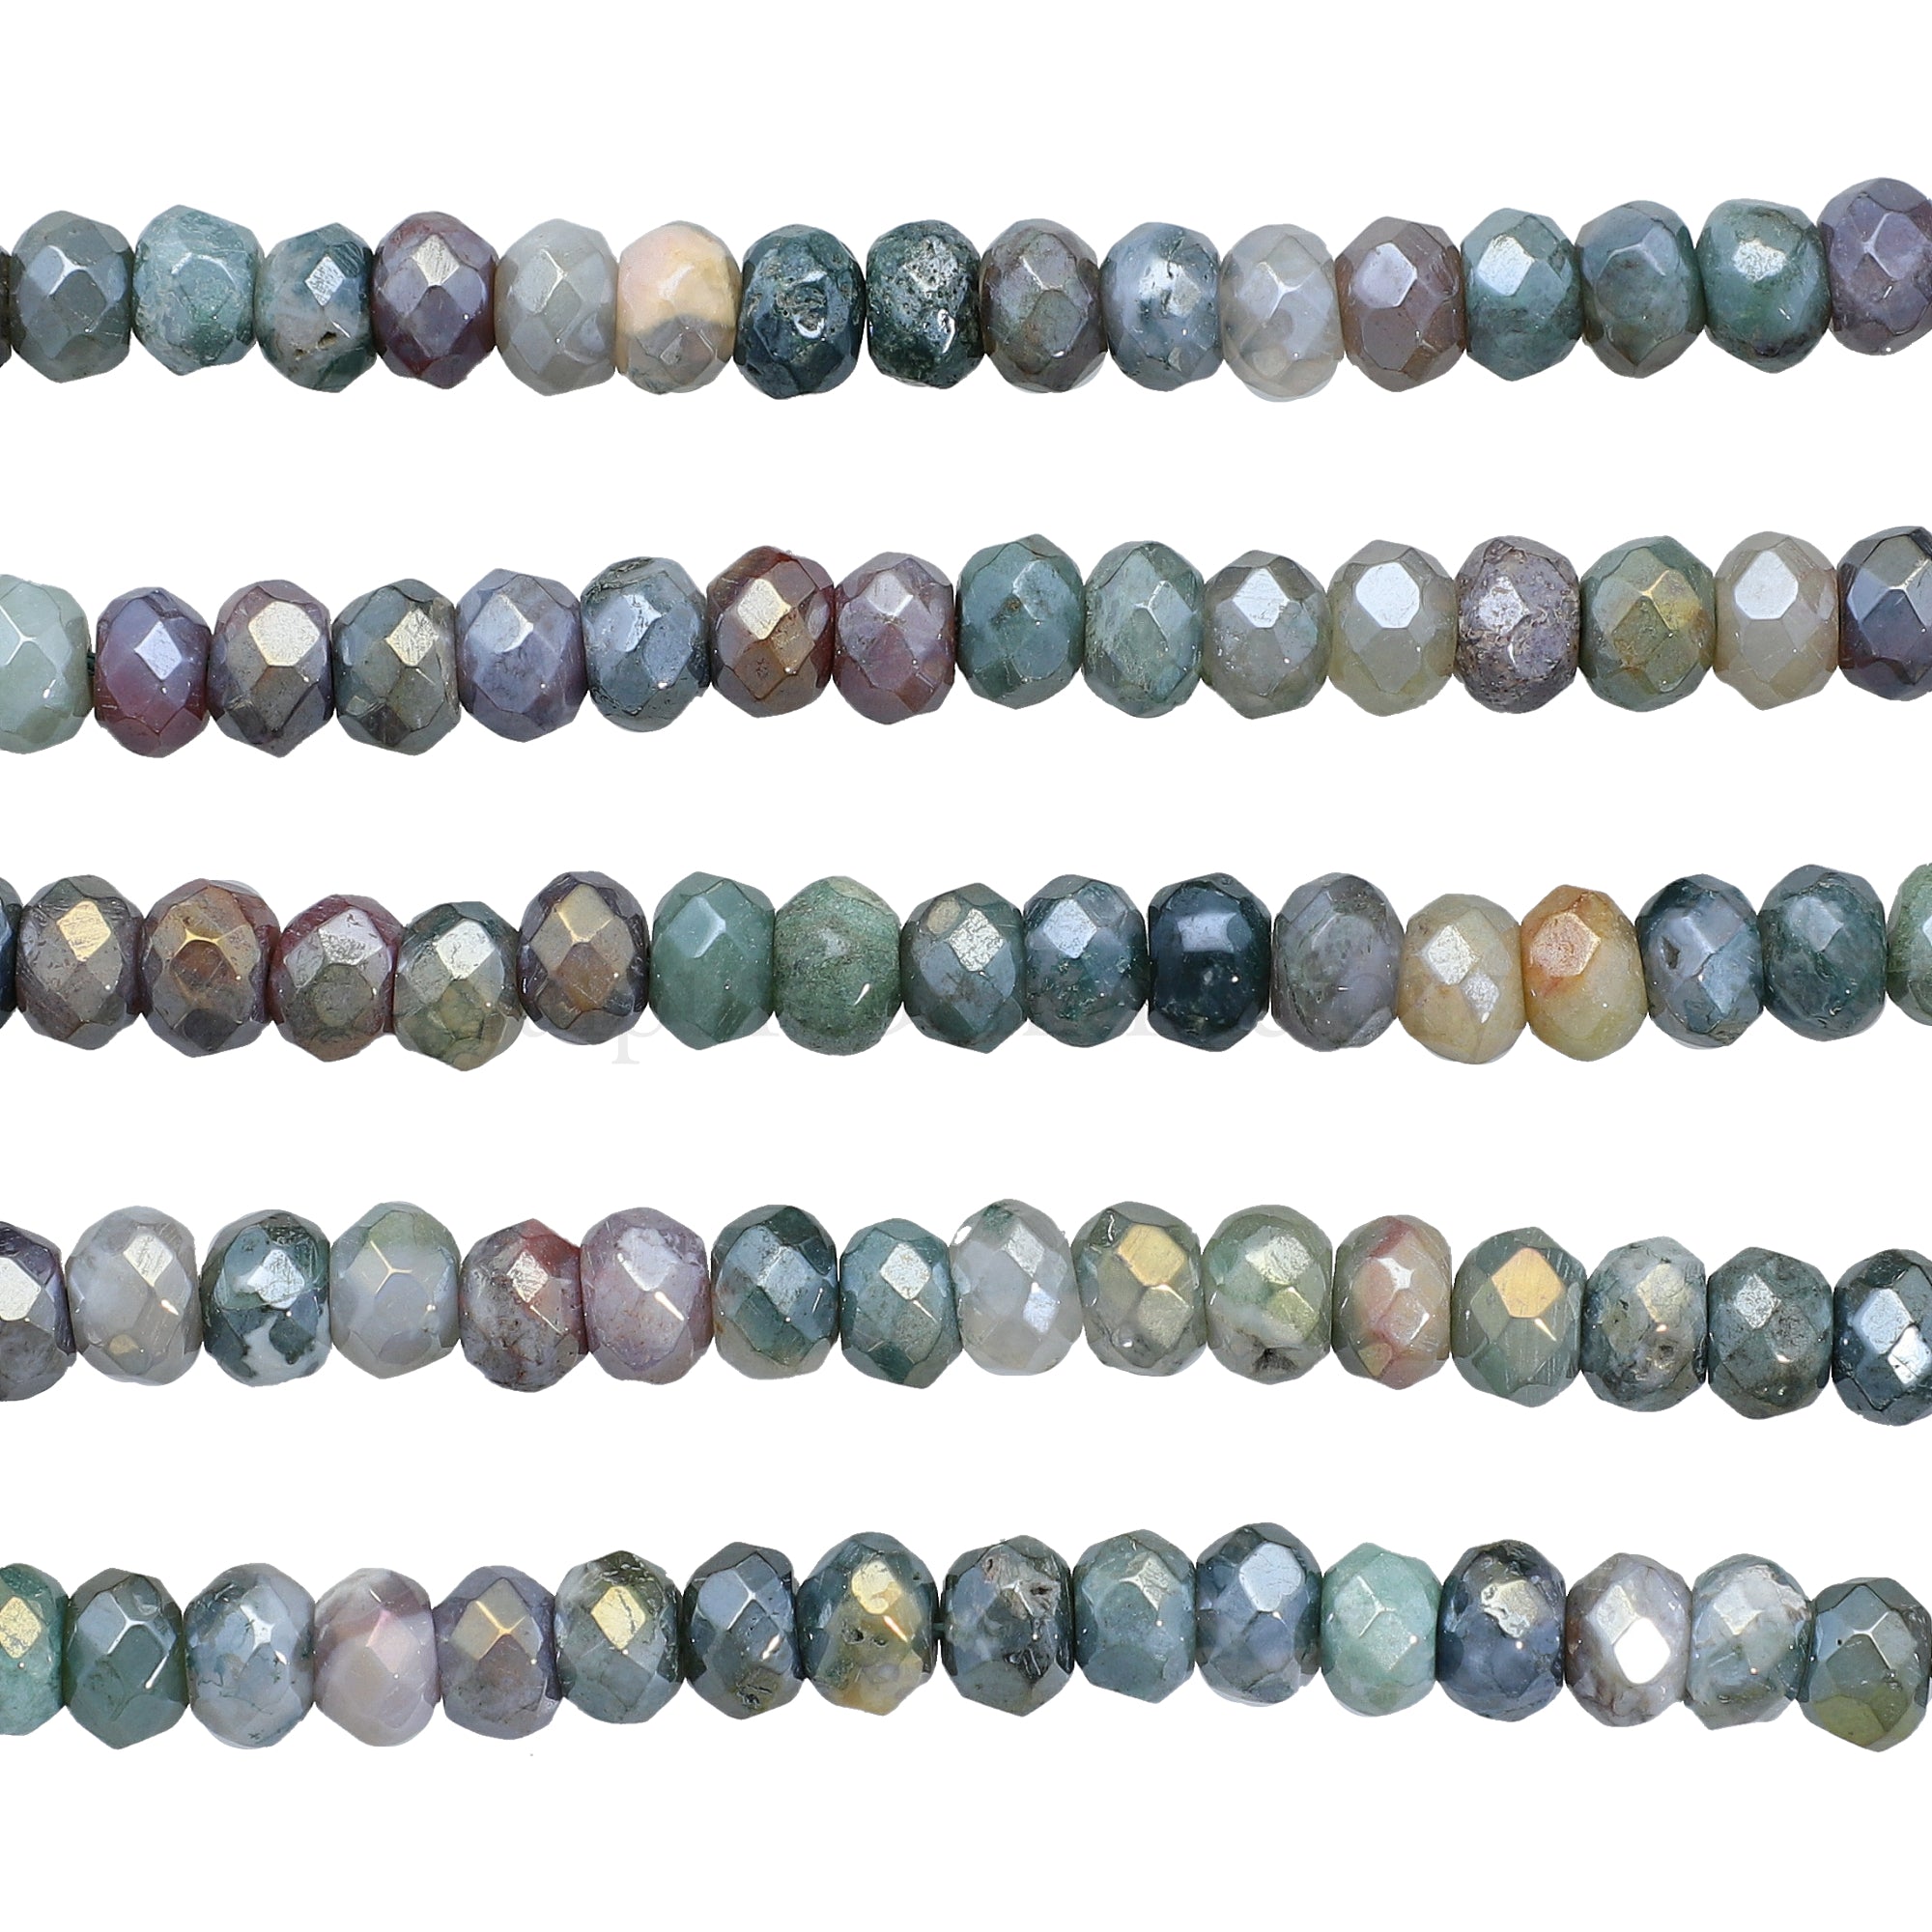 8 MM Mystic Coated Jasper Faceted Rondelle Beads 15 Inches Strand